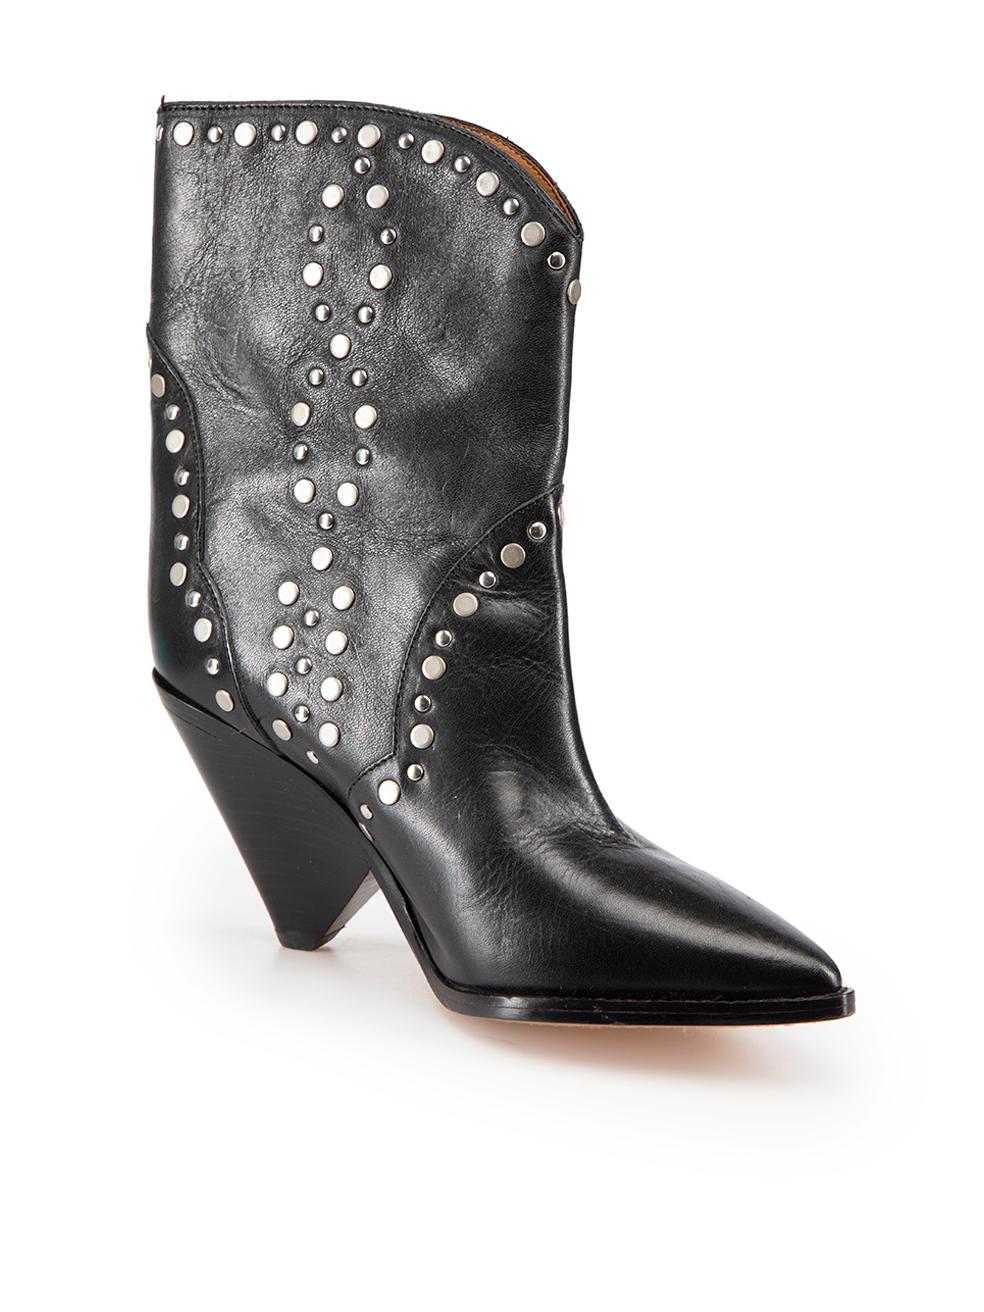 CONDITION is Very good. Minimal wear to boots is evident. Minimal wear to both toes with light scratches to the leather on this used Isabel Marant designer resale item.

Details
Black
Leather
Cowboy boots
Point toe
Silver studded detail
Slip on
Made